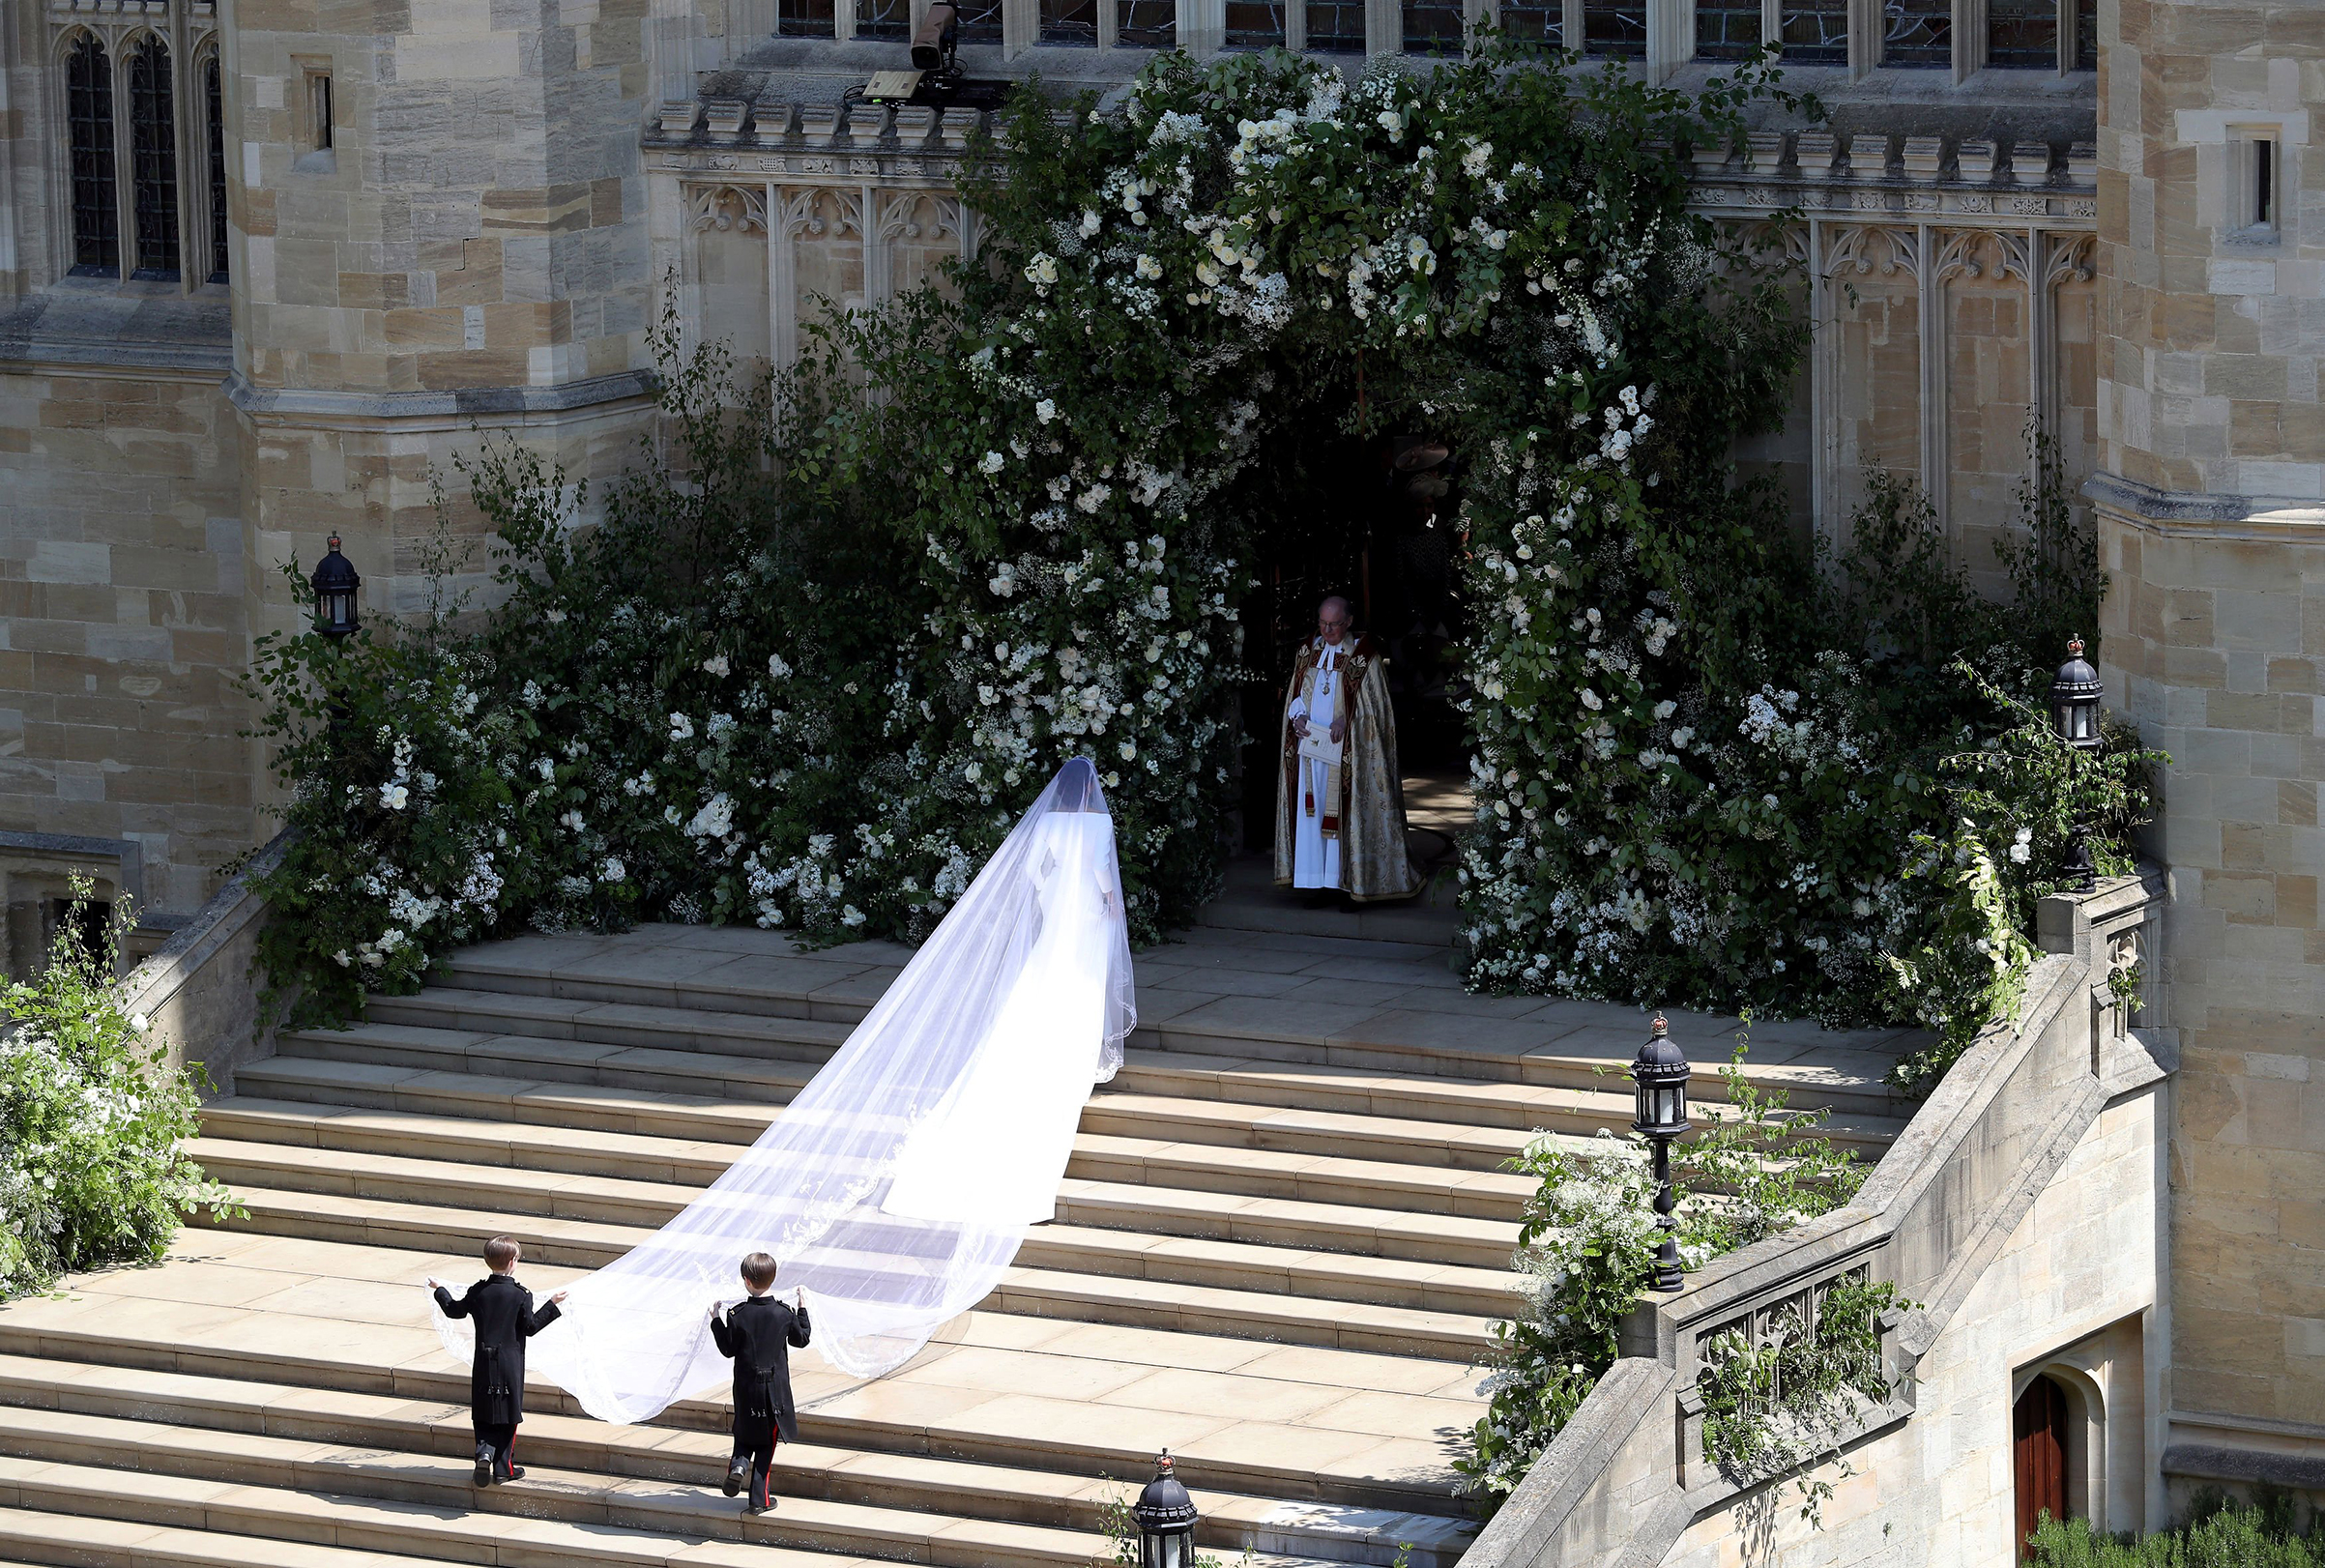 The bride arrives to St George's Chapel. (Andrew Matthews—Pool/Reuters)